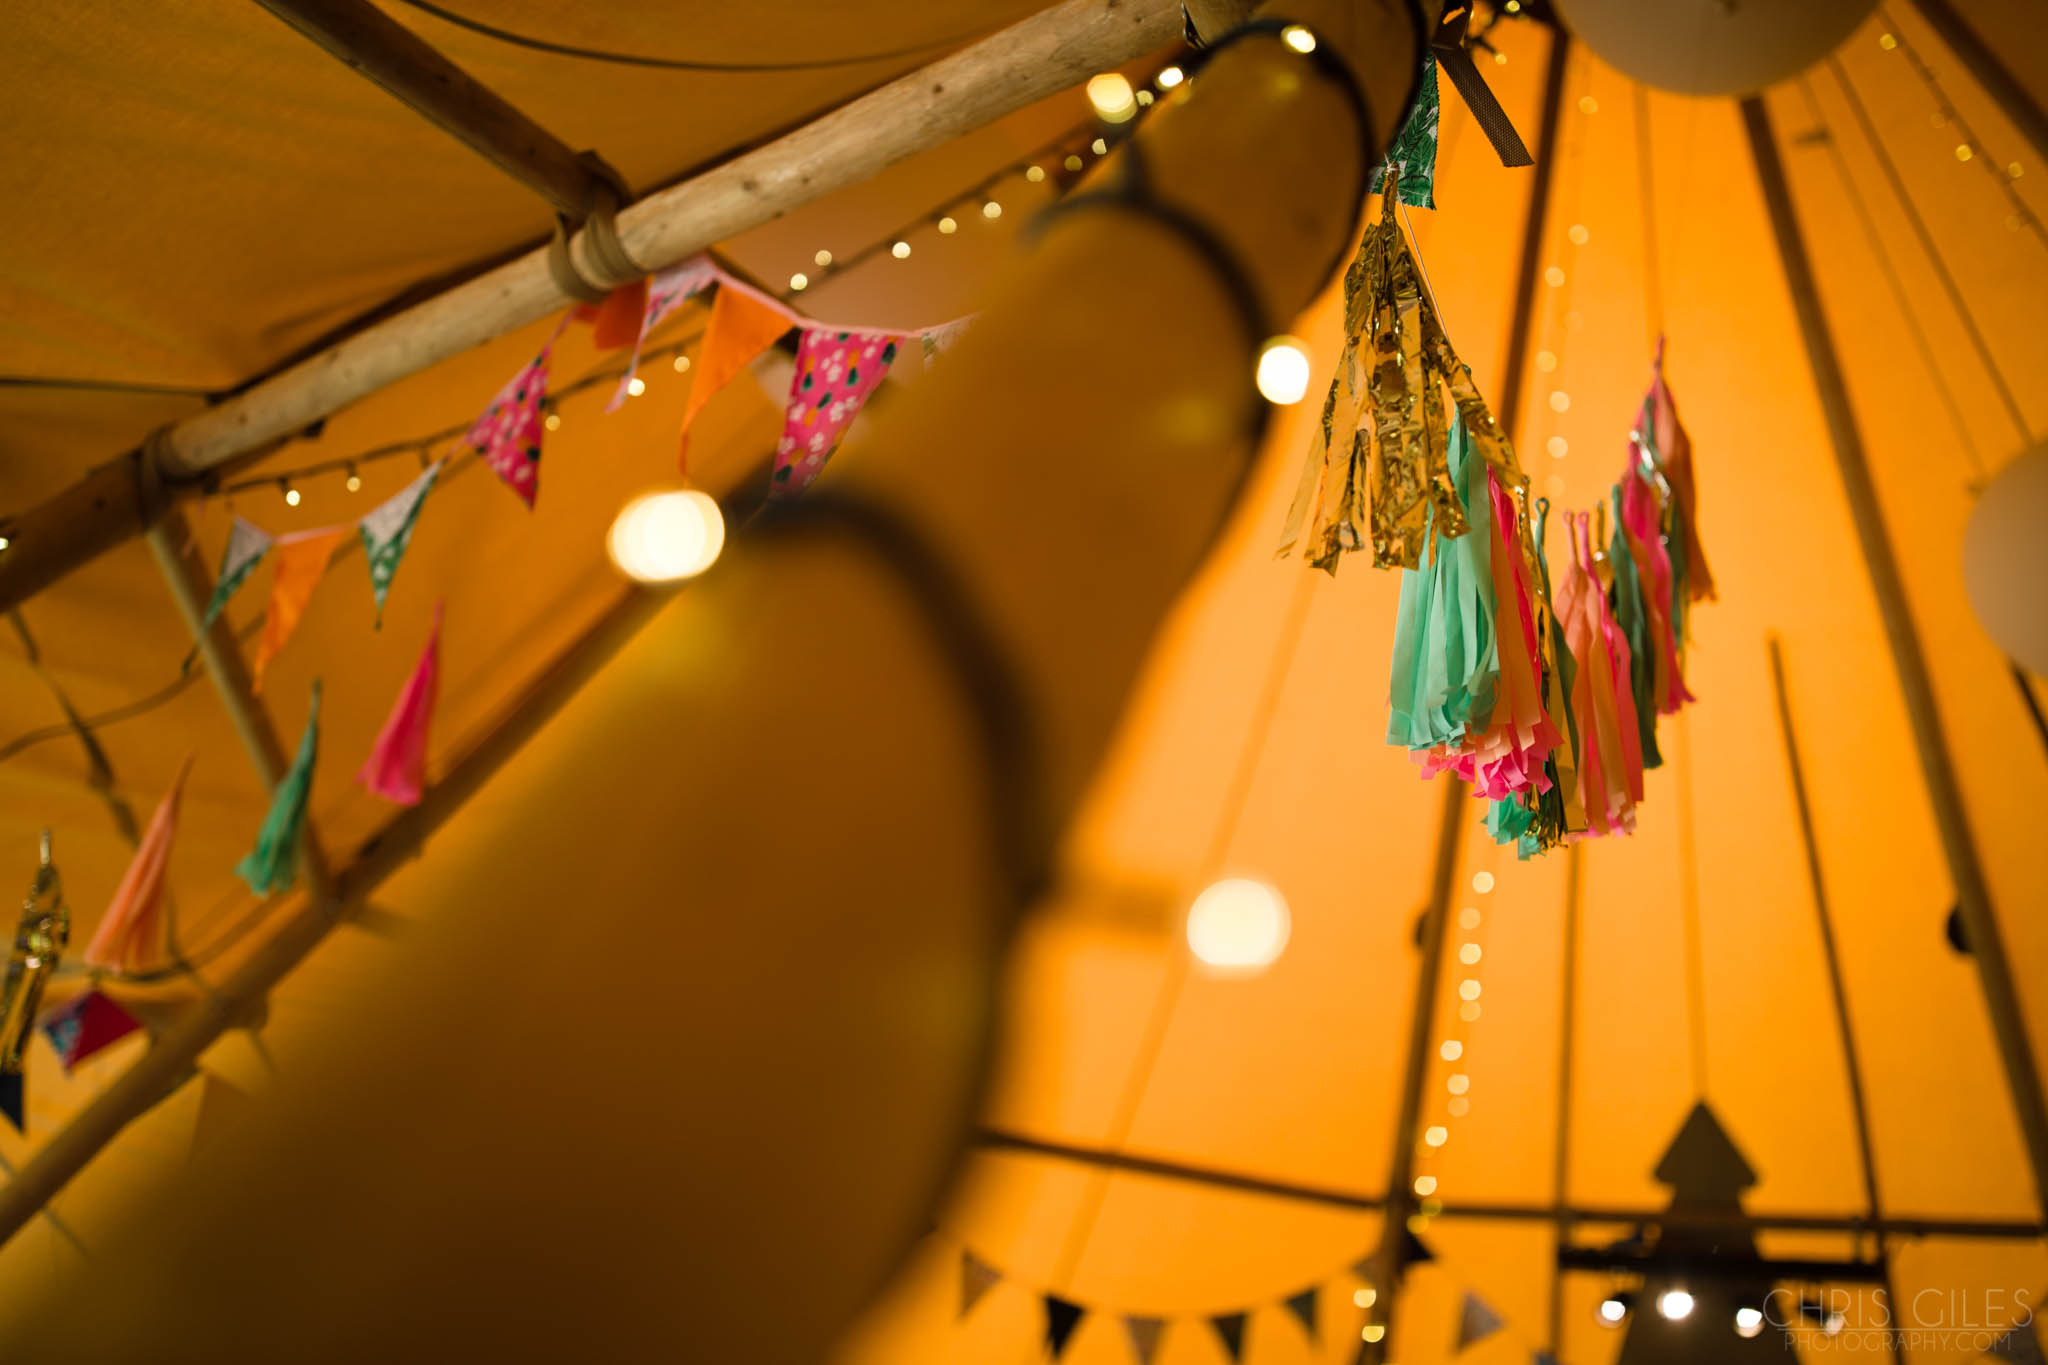 Ceiling decorations in a Tipi